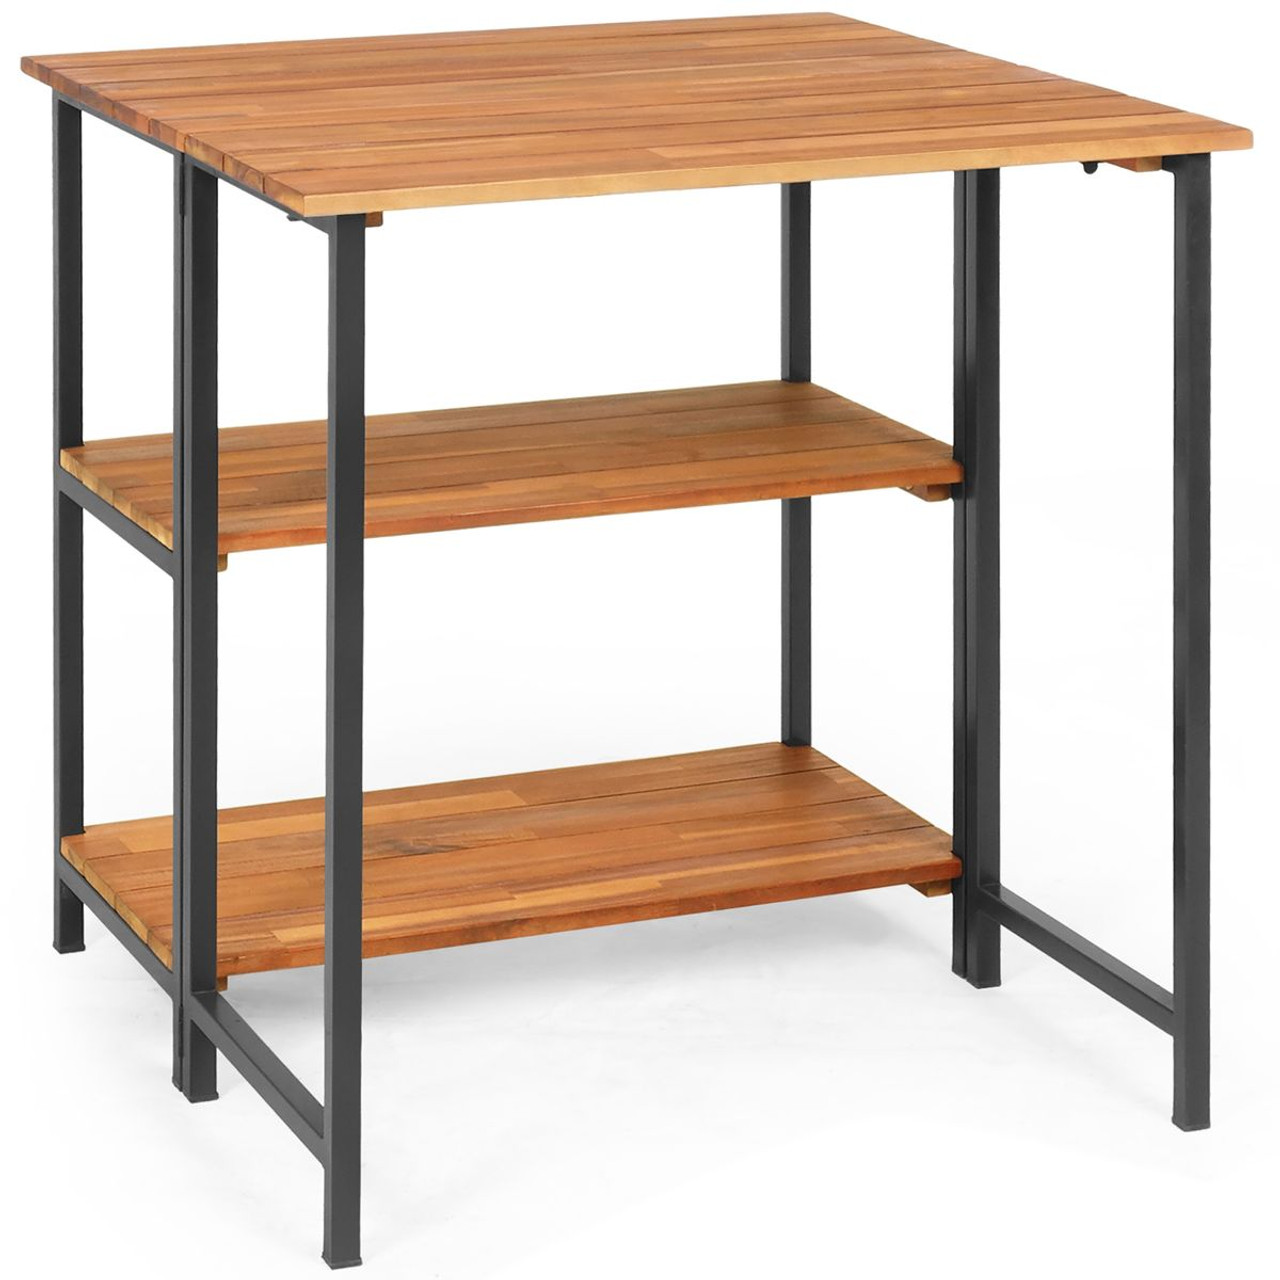 Acacia Wood Patio Folding Dining Table with Storage Shelves product image